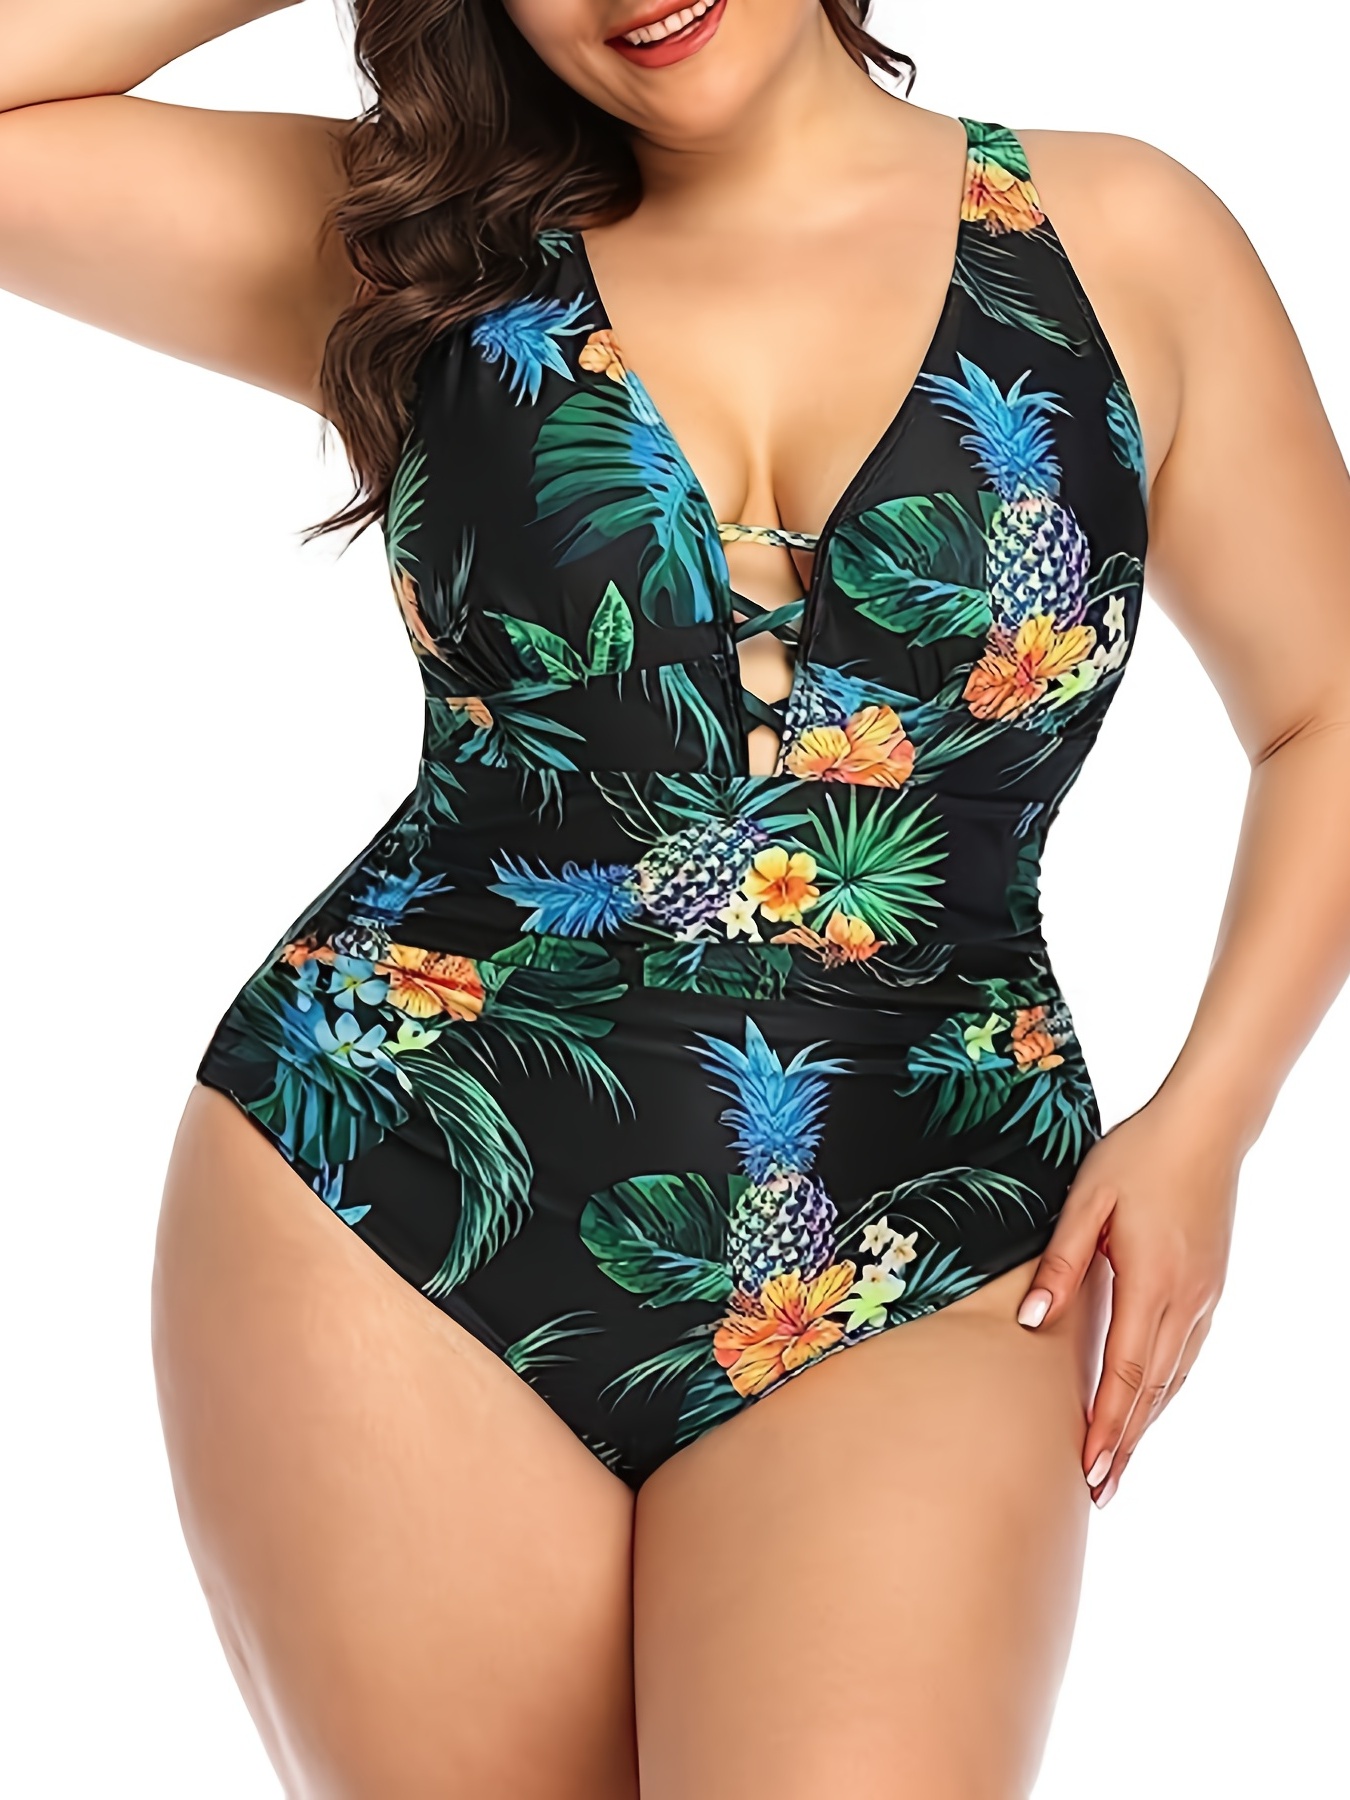 Women's Green Plus Size One Piece Ruched Cutout Halter Self Tied